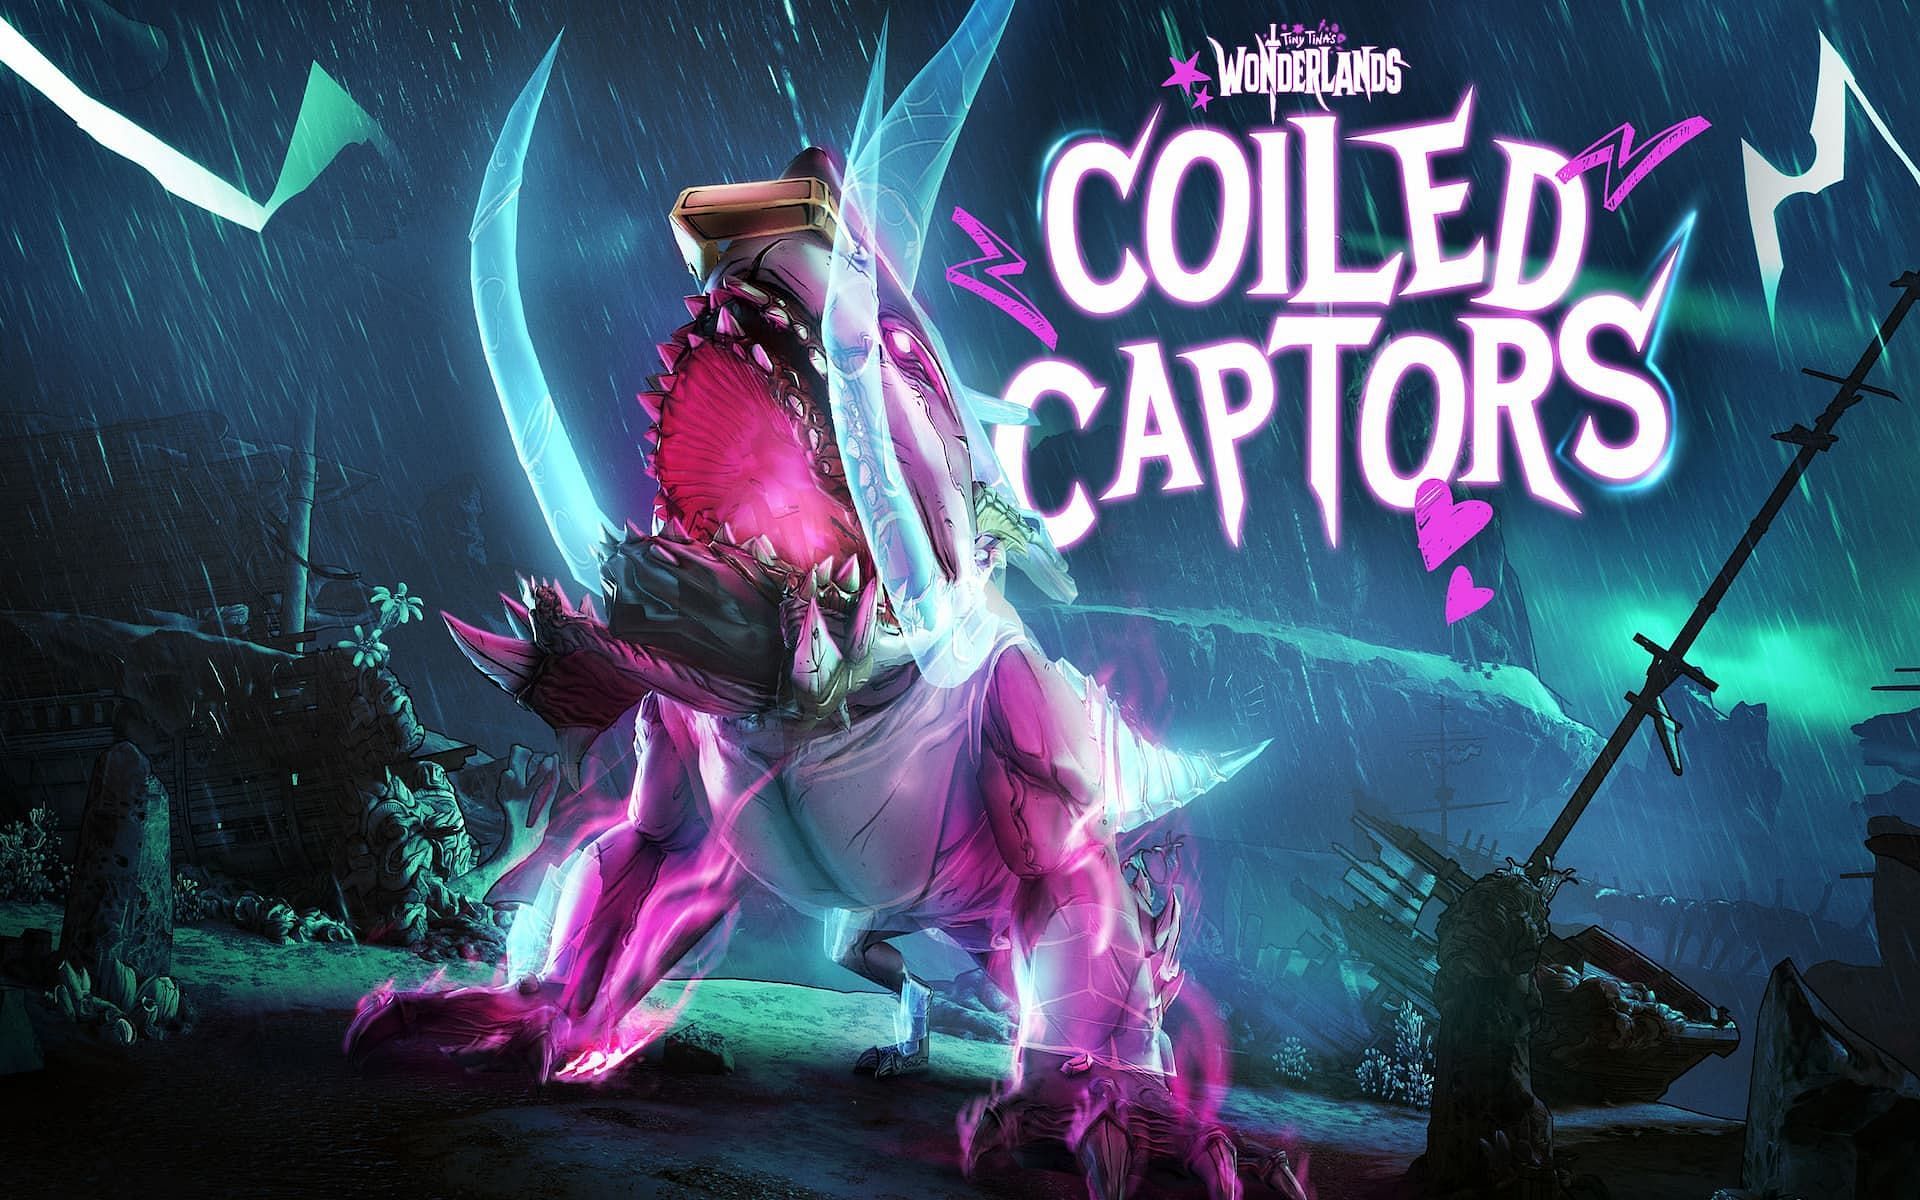 A promotional image for the Coiled Captors DLC (Image via Gearbox Software)